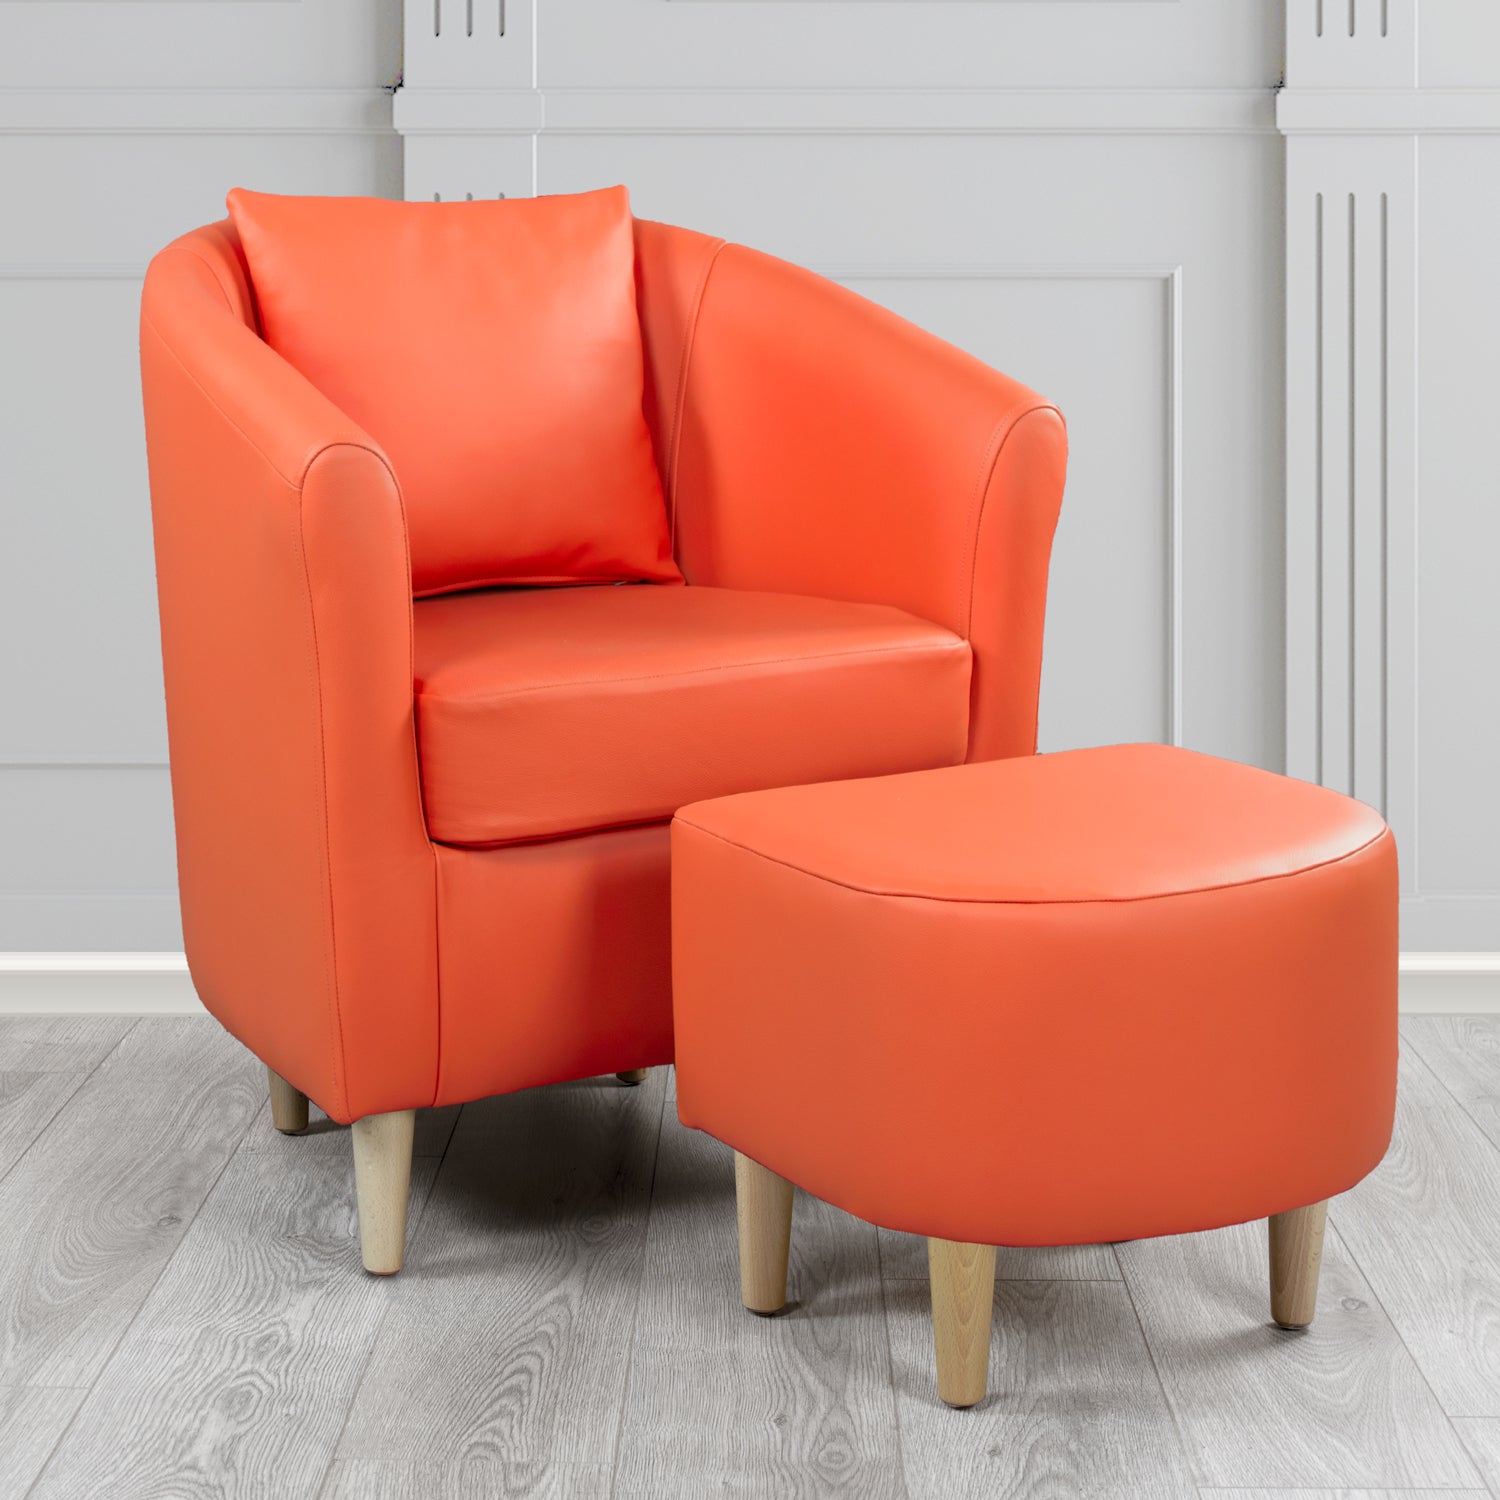 St Tropez Shelly Firestone Crib 5 Genuine Leather Tub Chair & Footstool Set With Scatter Cushion (6619493105706)